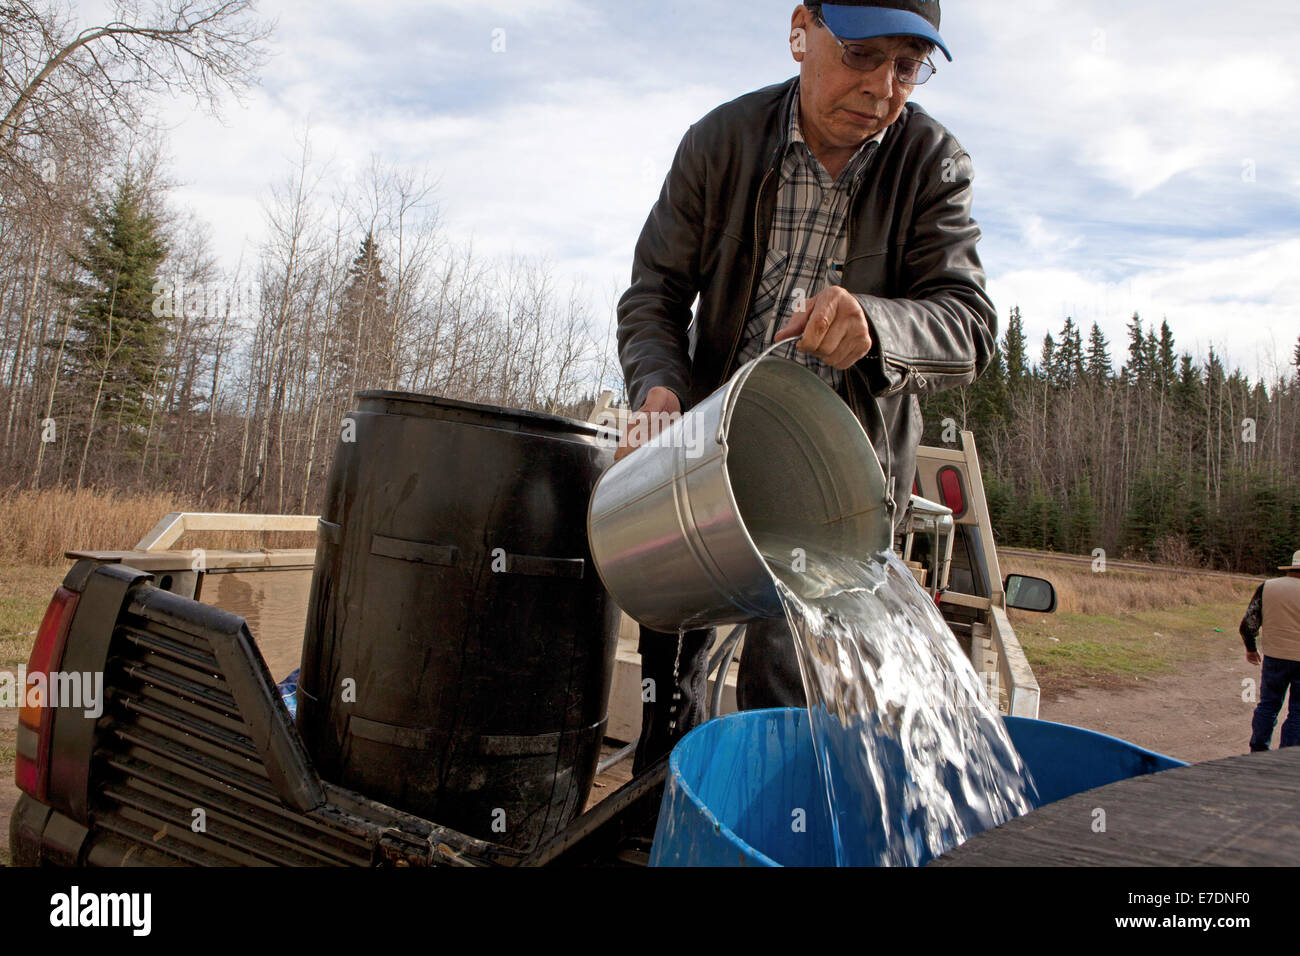 Man on pick up truck pouring fresh water from bucket, Peace River ...